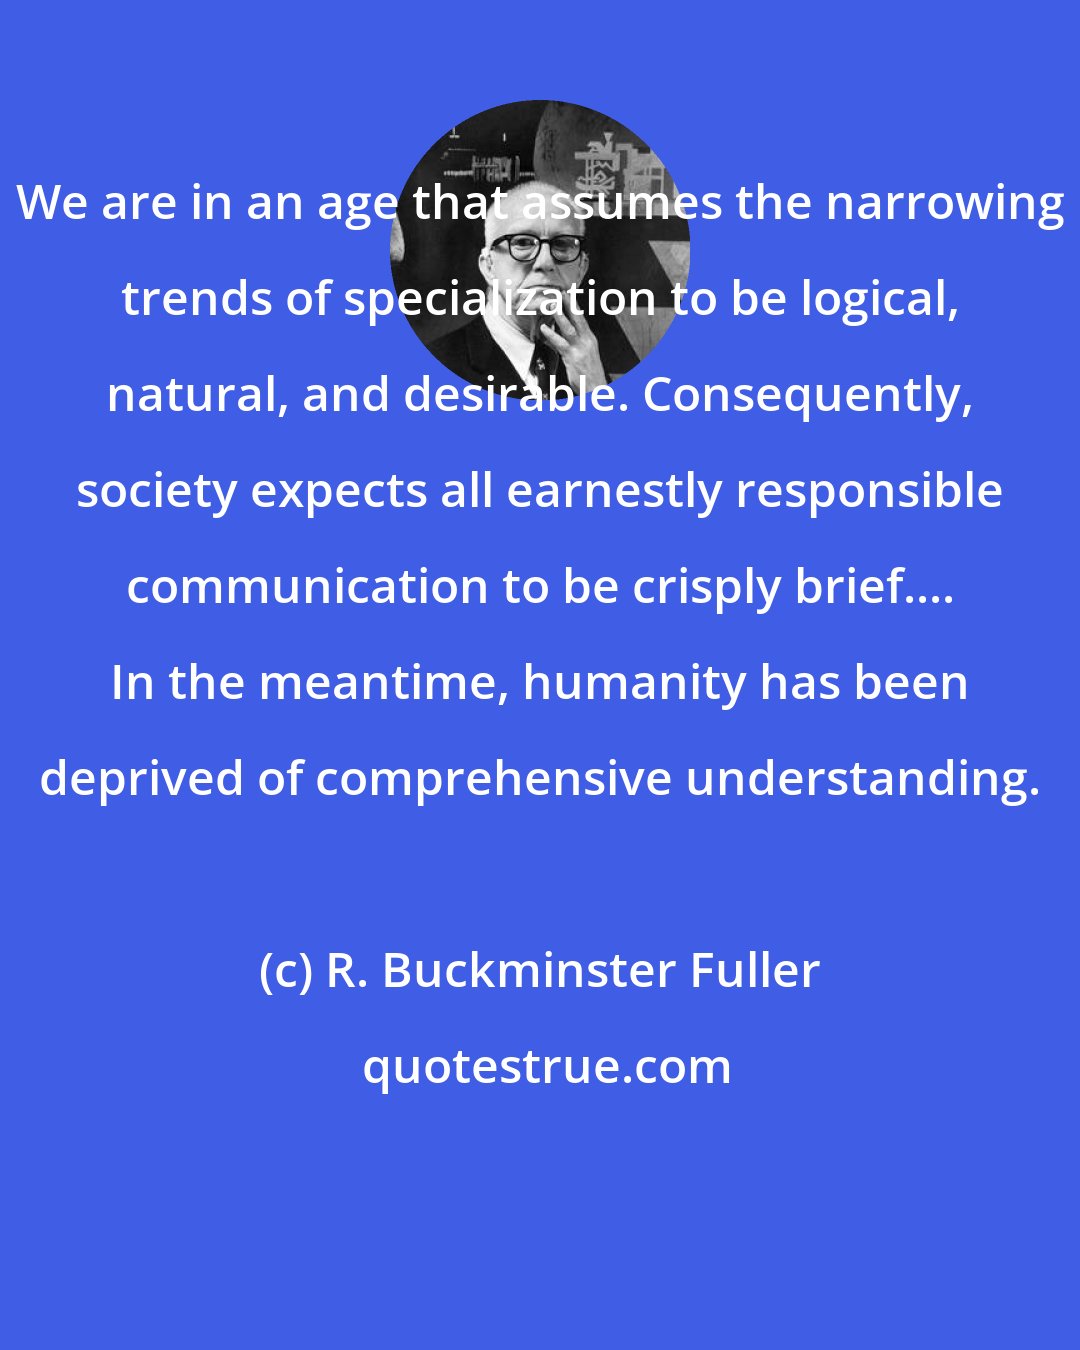 R. Buckminster Fuller: We are in an age that assumes the narrowing trends of specialization to be logical, natural, and desirable. Consequently, society expects all earnestly responsible communication to be crisply brief.... In the meantime, humanity has been deprived of comprehensive understanding.